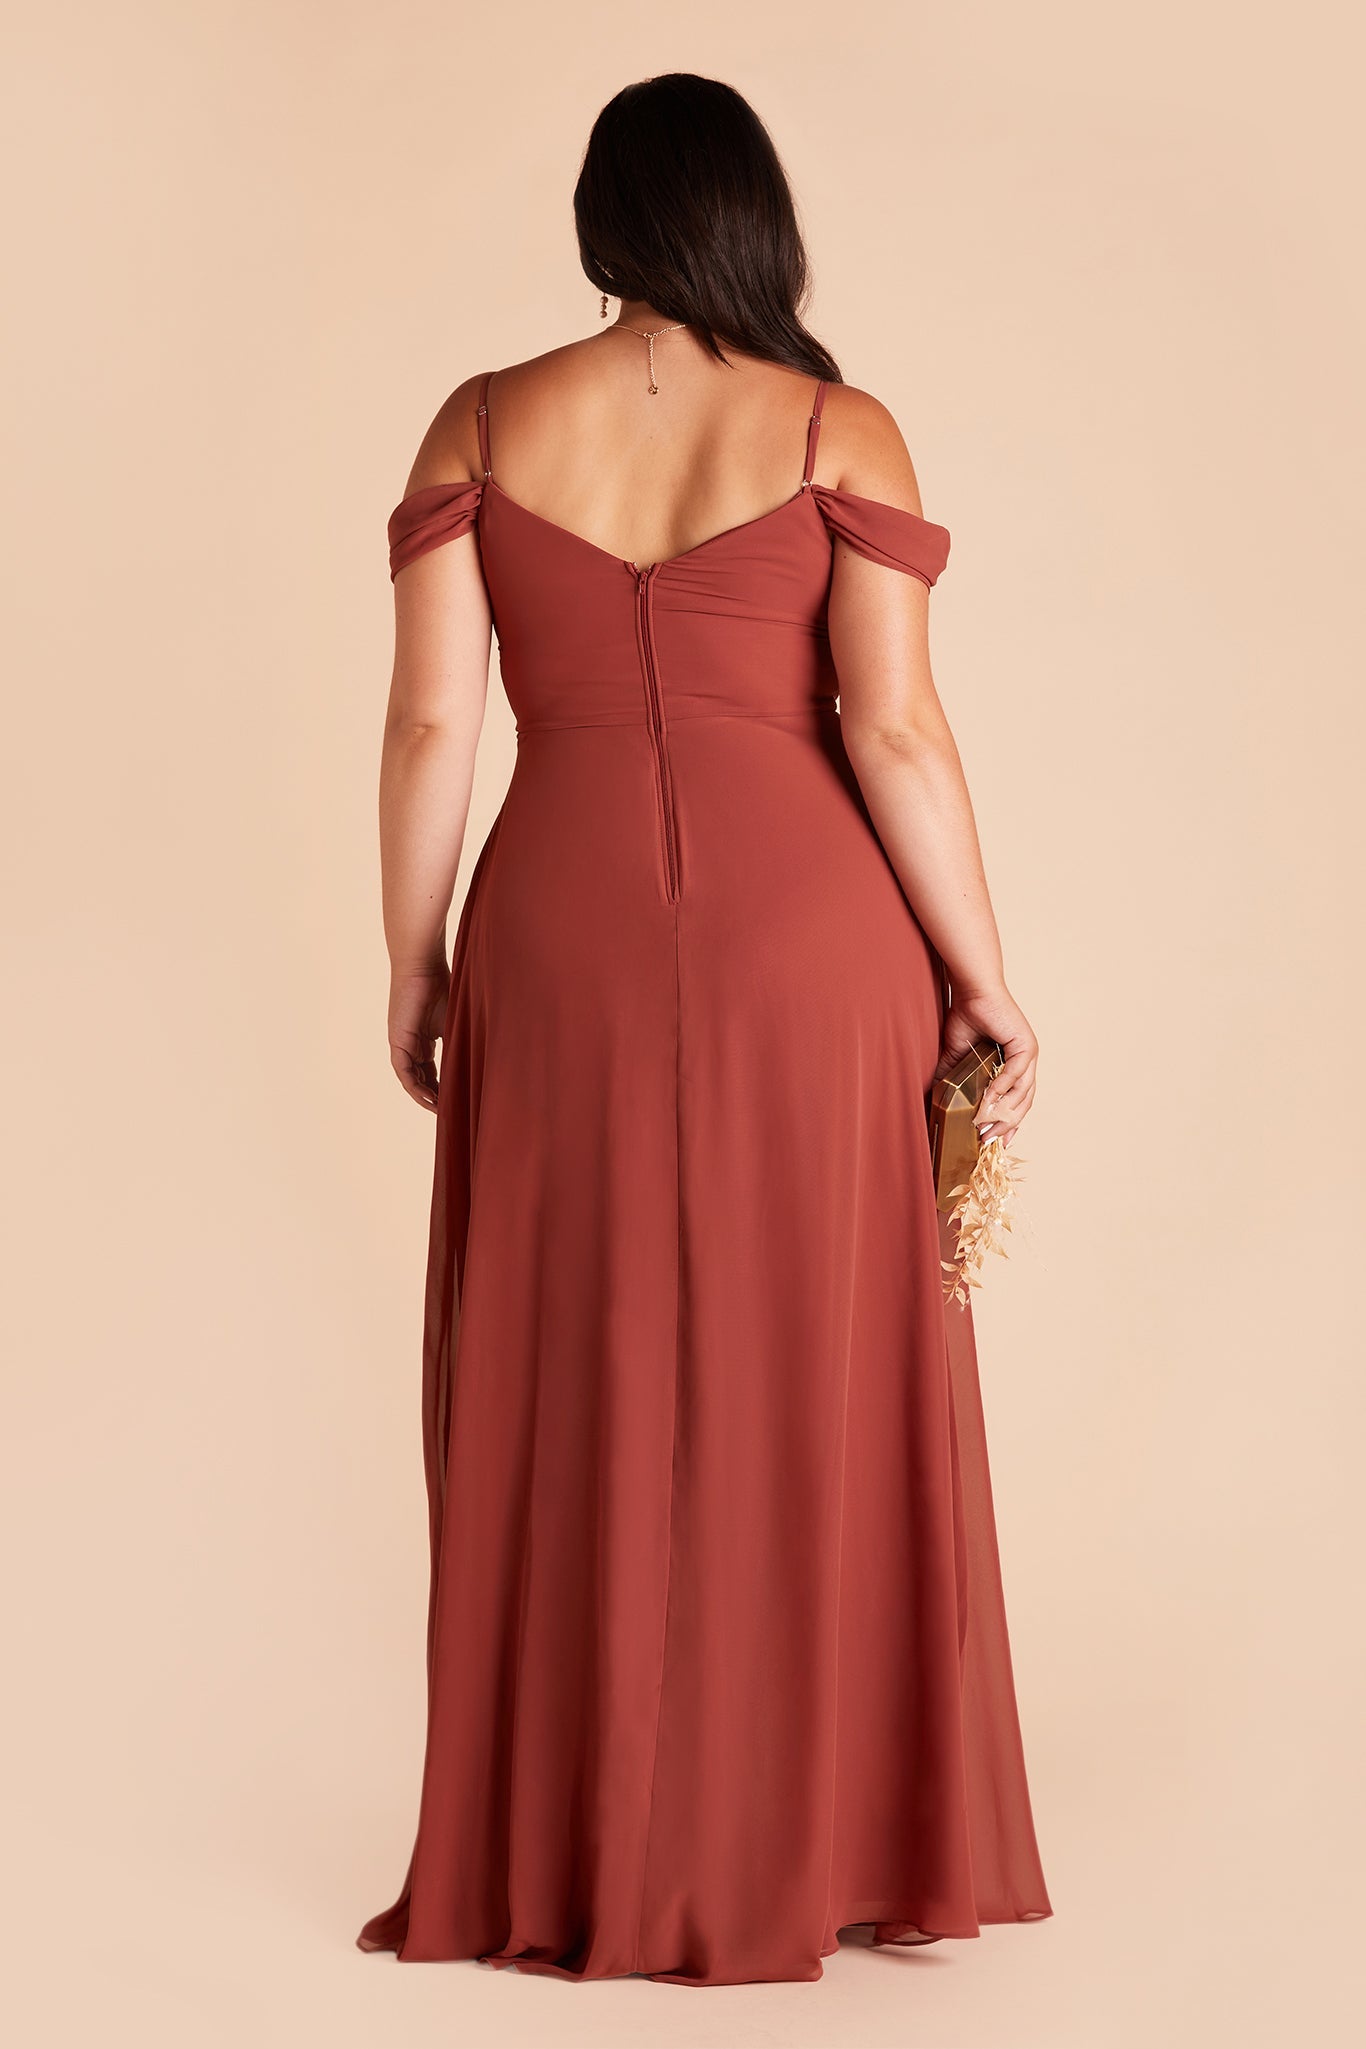 Devin convertible plus size bridesmaids dress with slit in spice chiffon by Birdy Grey, back view